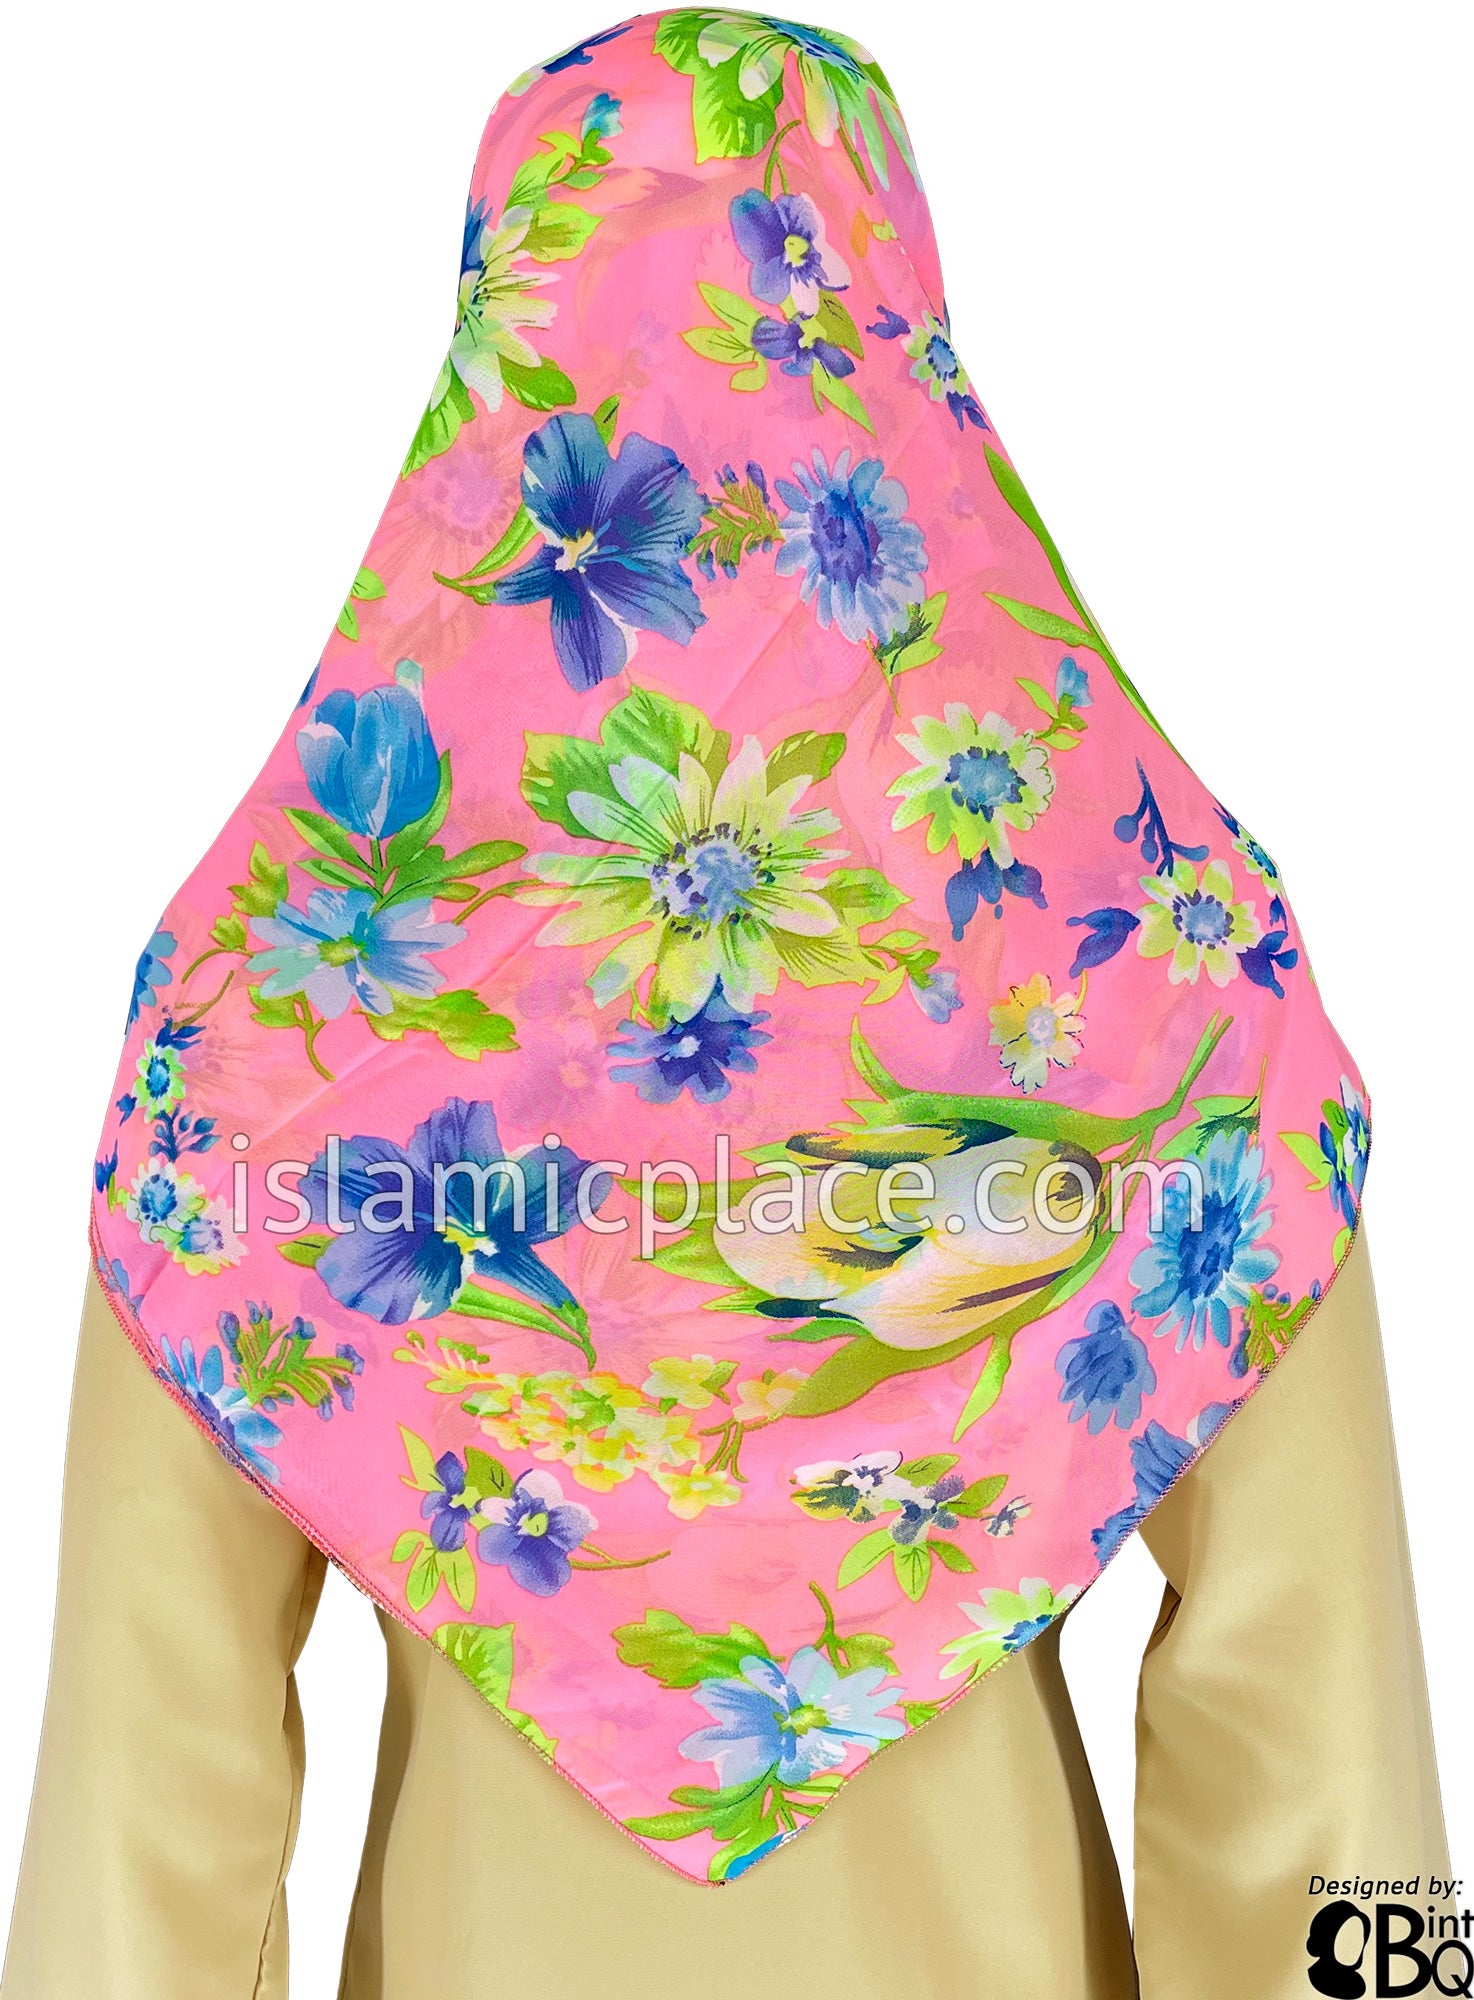 Lime Green, Navy Blue, Yellow, and Neon Pink Floral Design - 45" Square Printed Khimar